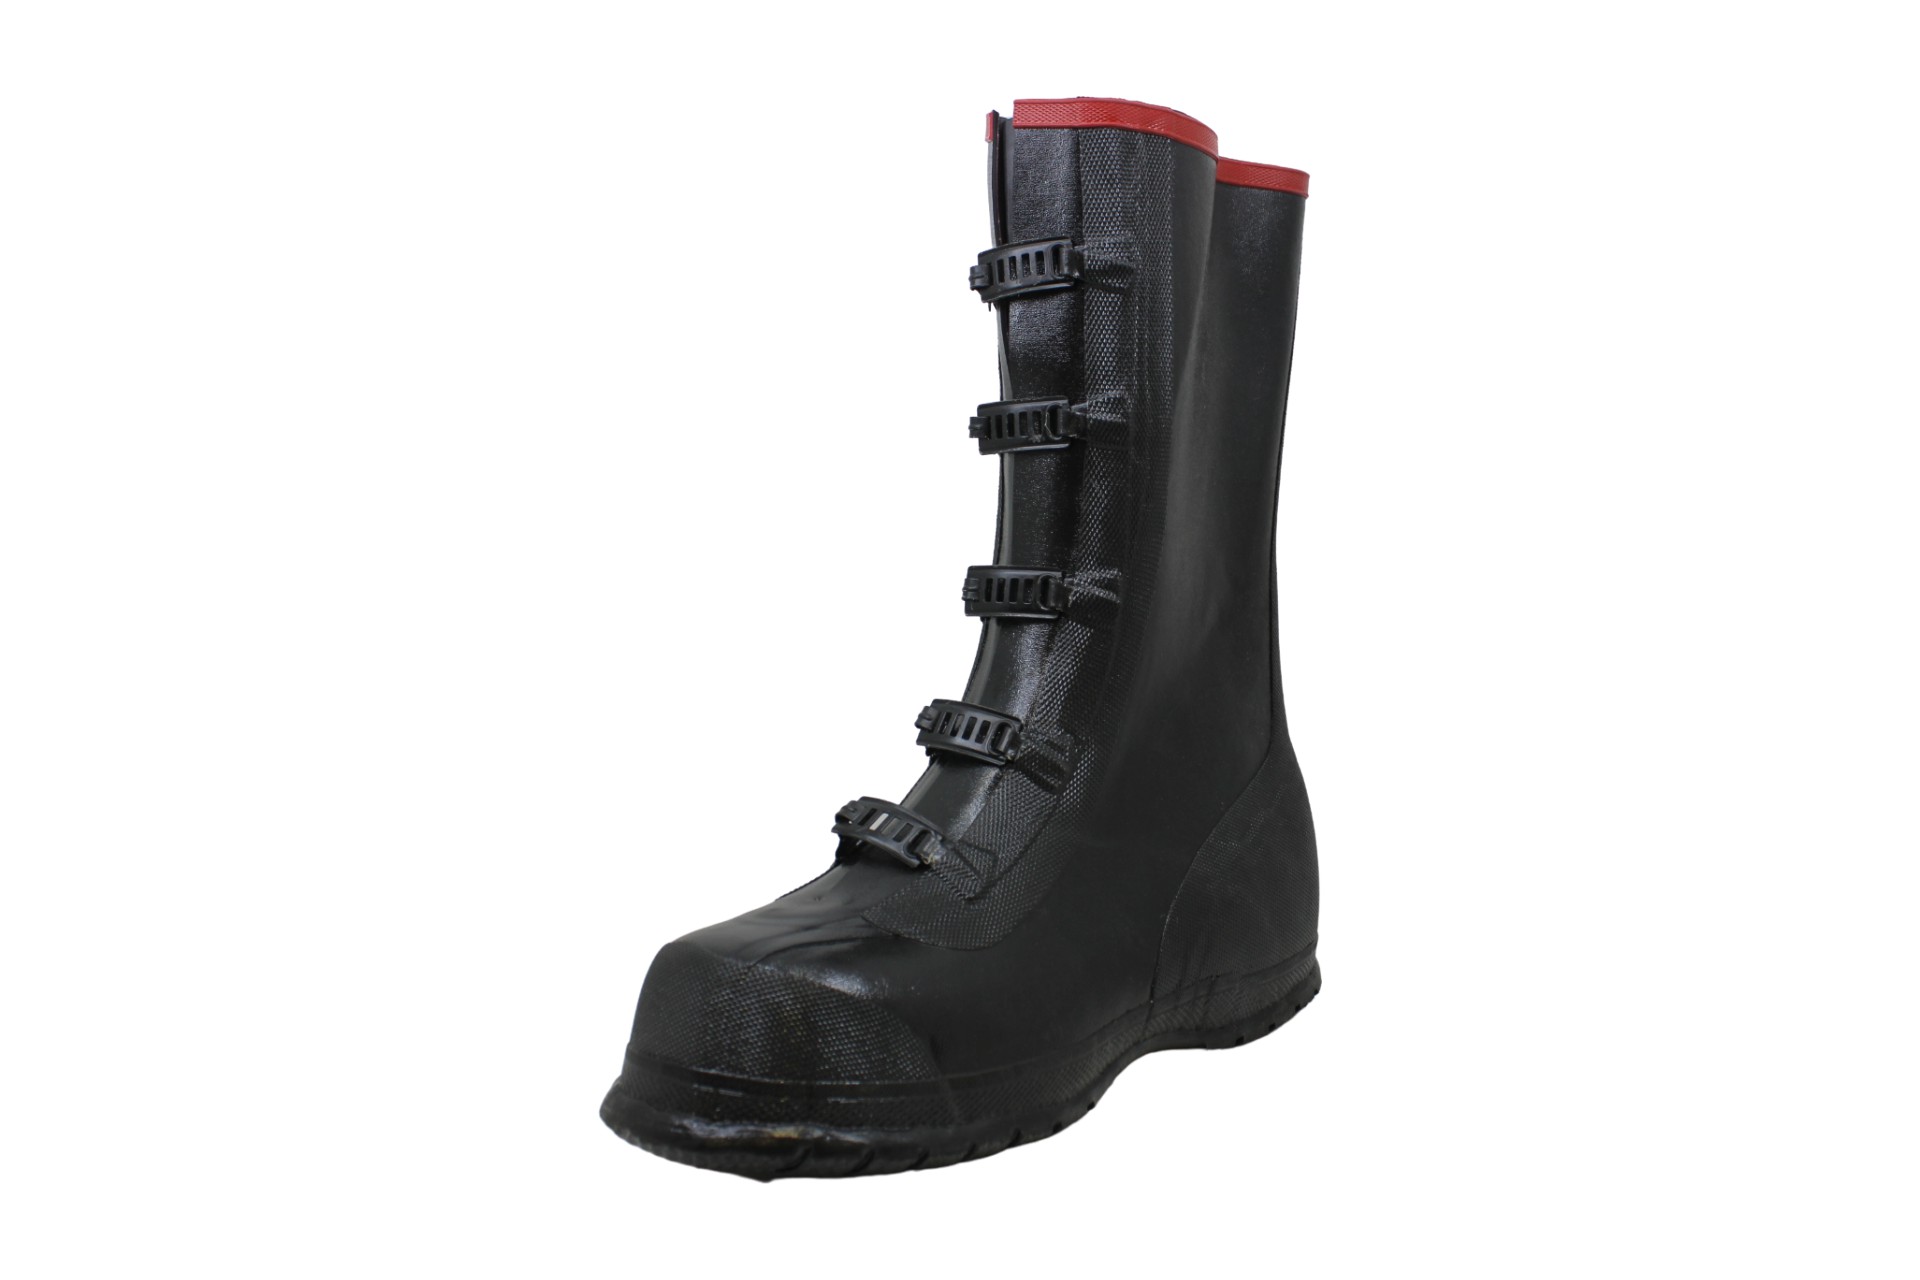 Ranger 15 in Rubber Overshoe Boot Size 11(M) - image 4 of 5